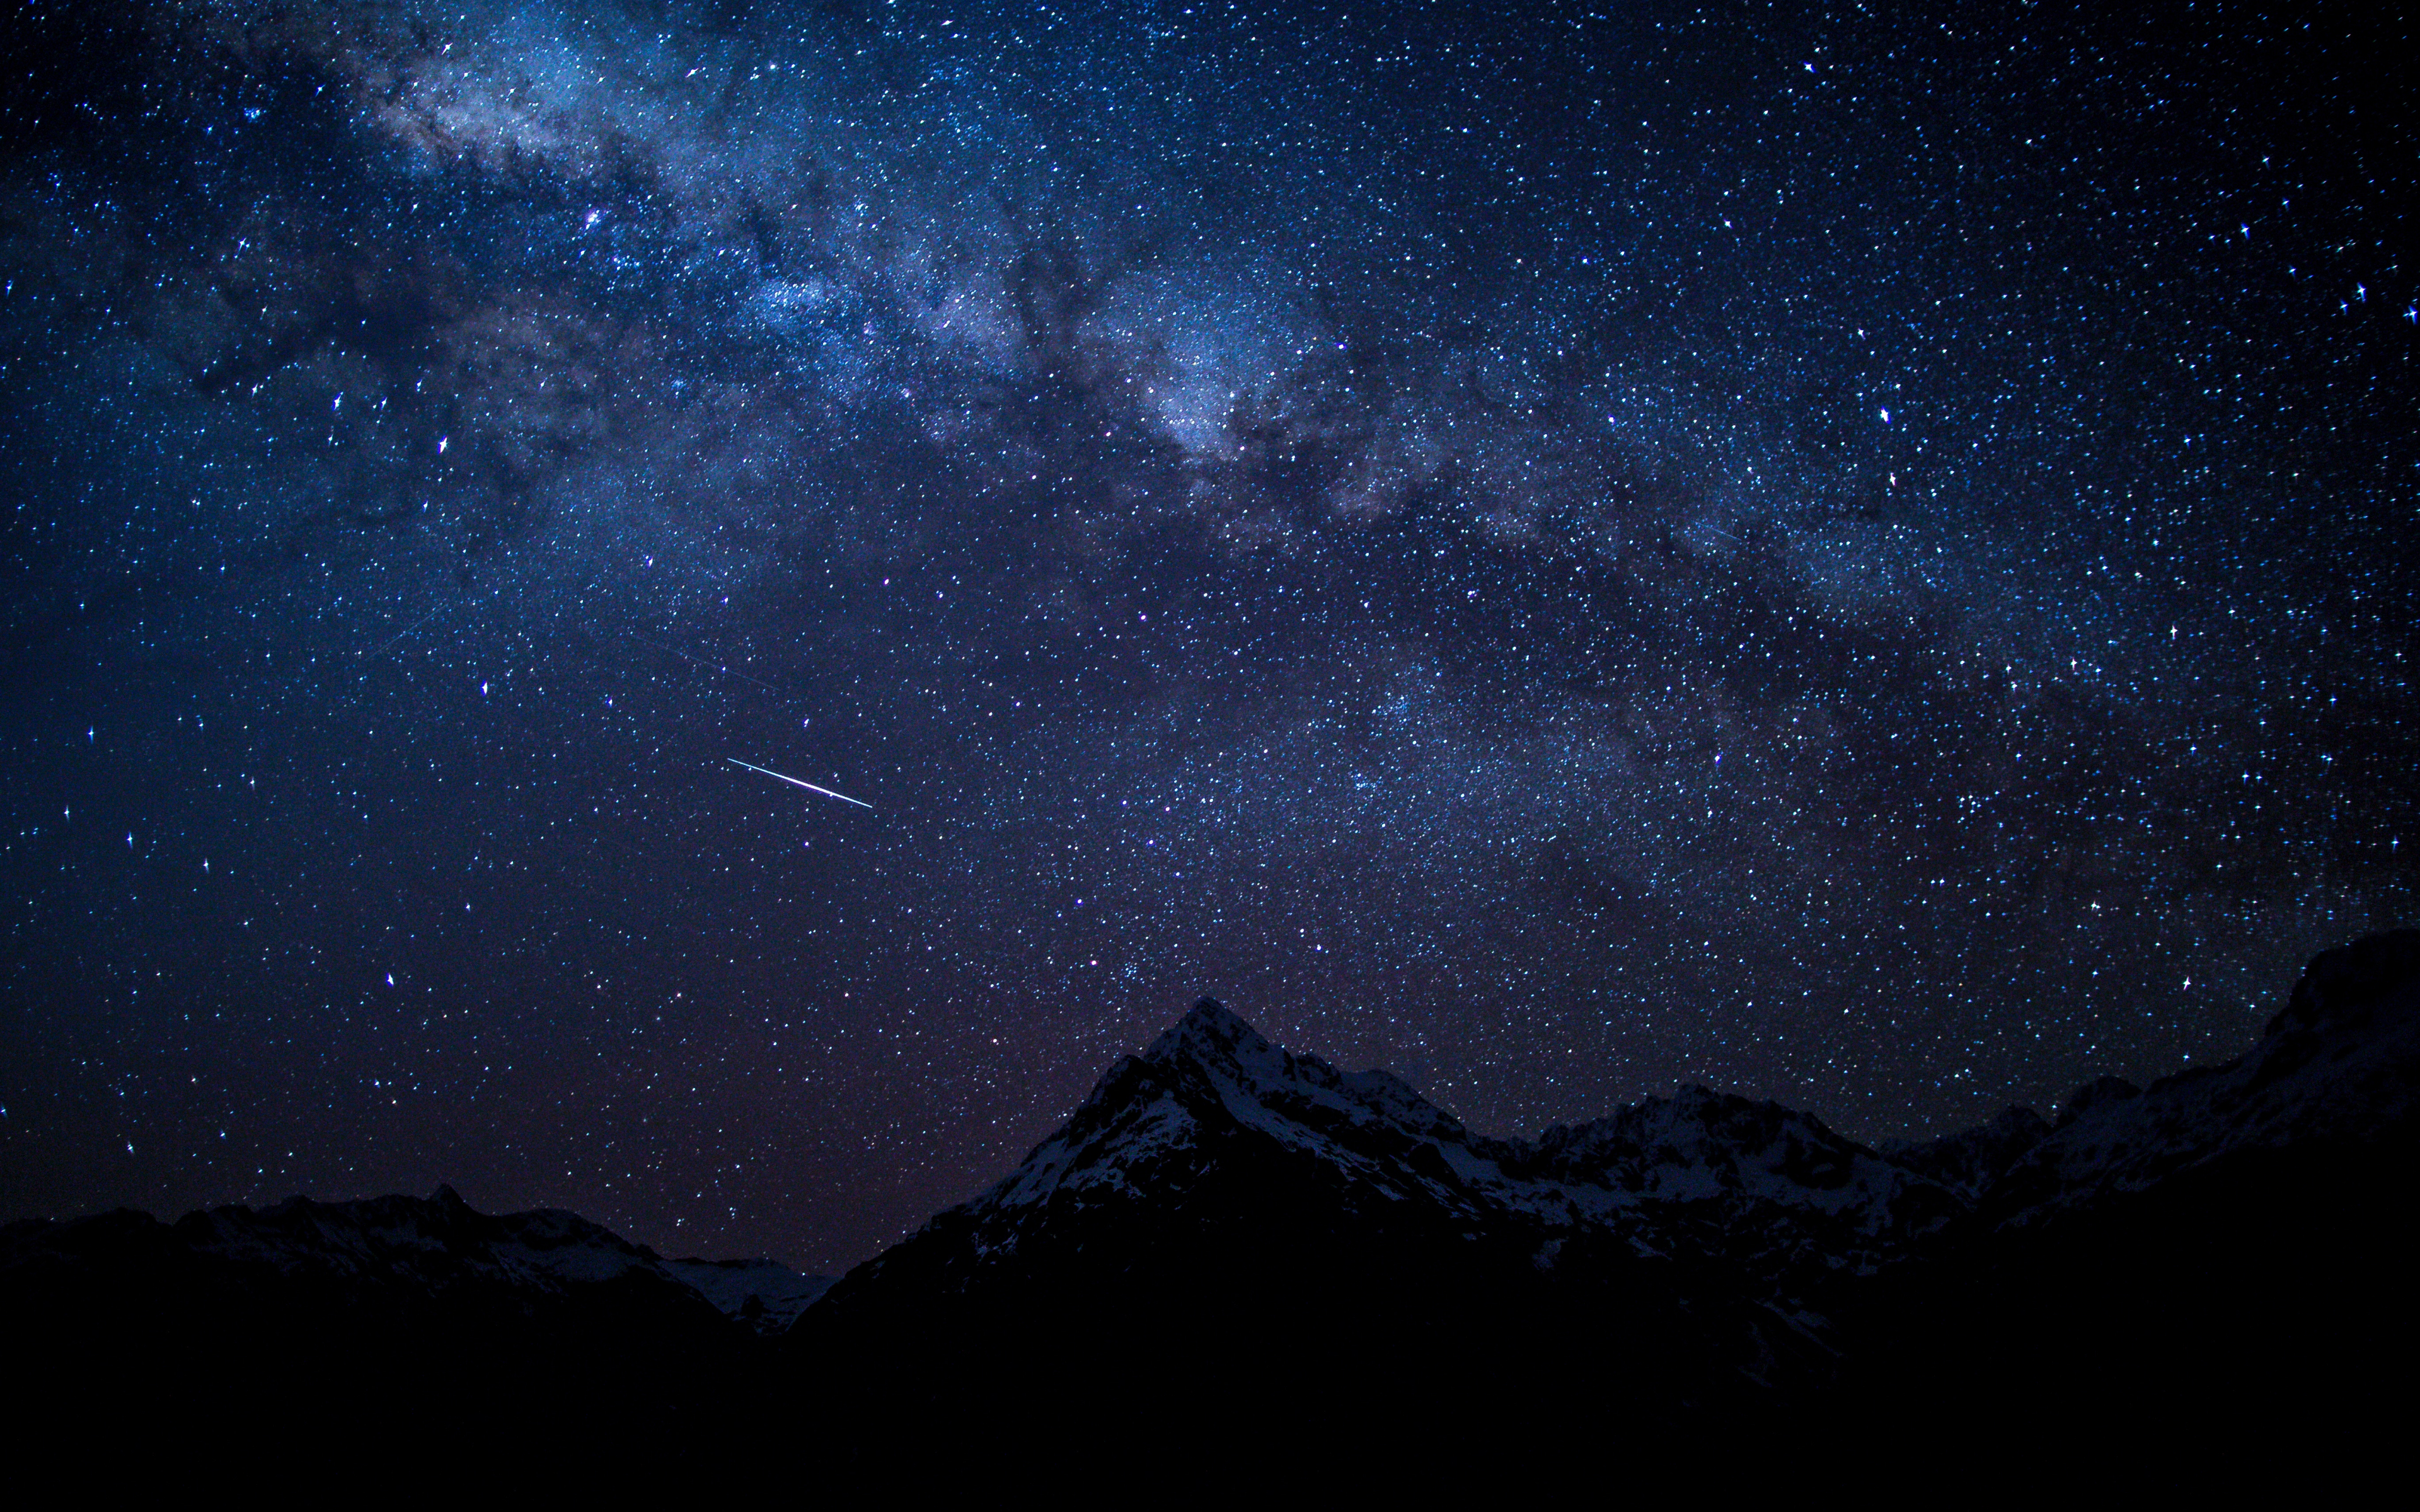 Download 3840x2400 Wallpaper Starry Sky Night Mountains Nature 4k Ultra Hd 16 10 Widescreen 3840x2400 Hd Image Background 678